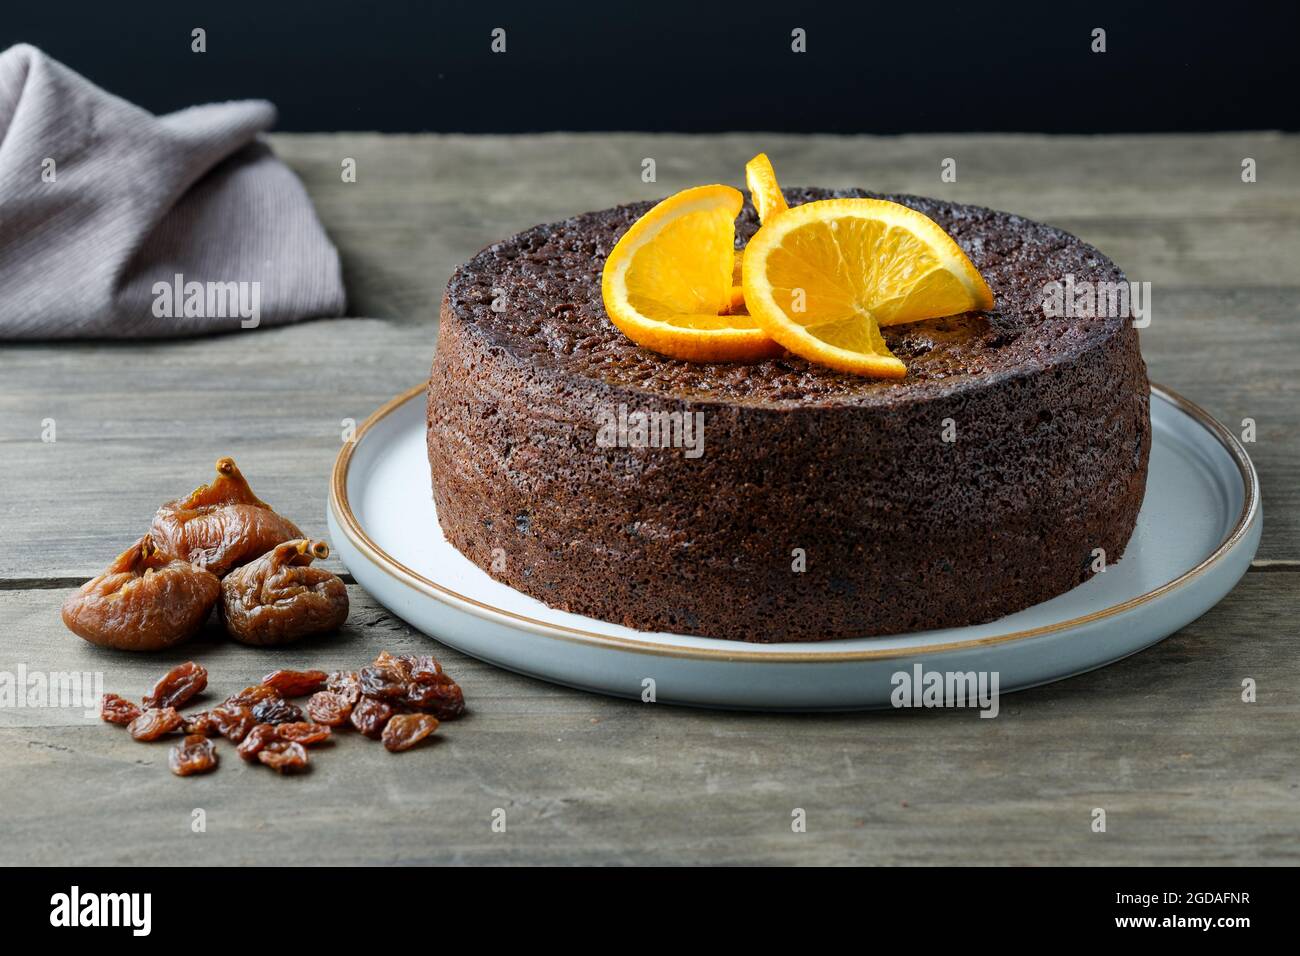 A home baked orange, chocolate, fruit cake made using a Nigella Lawson recipe. The moist cake is decorated with slices of fresh orange Stock Photo